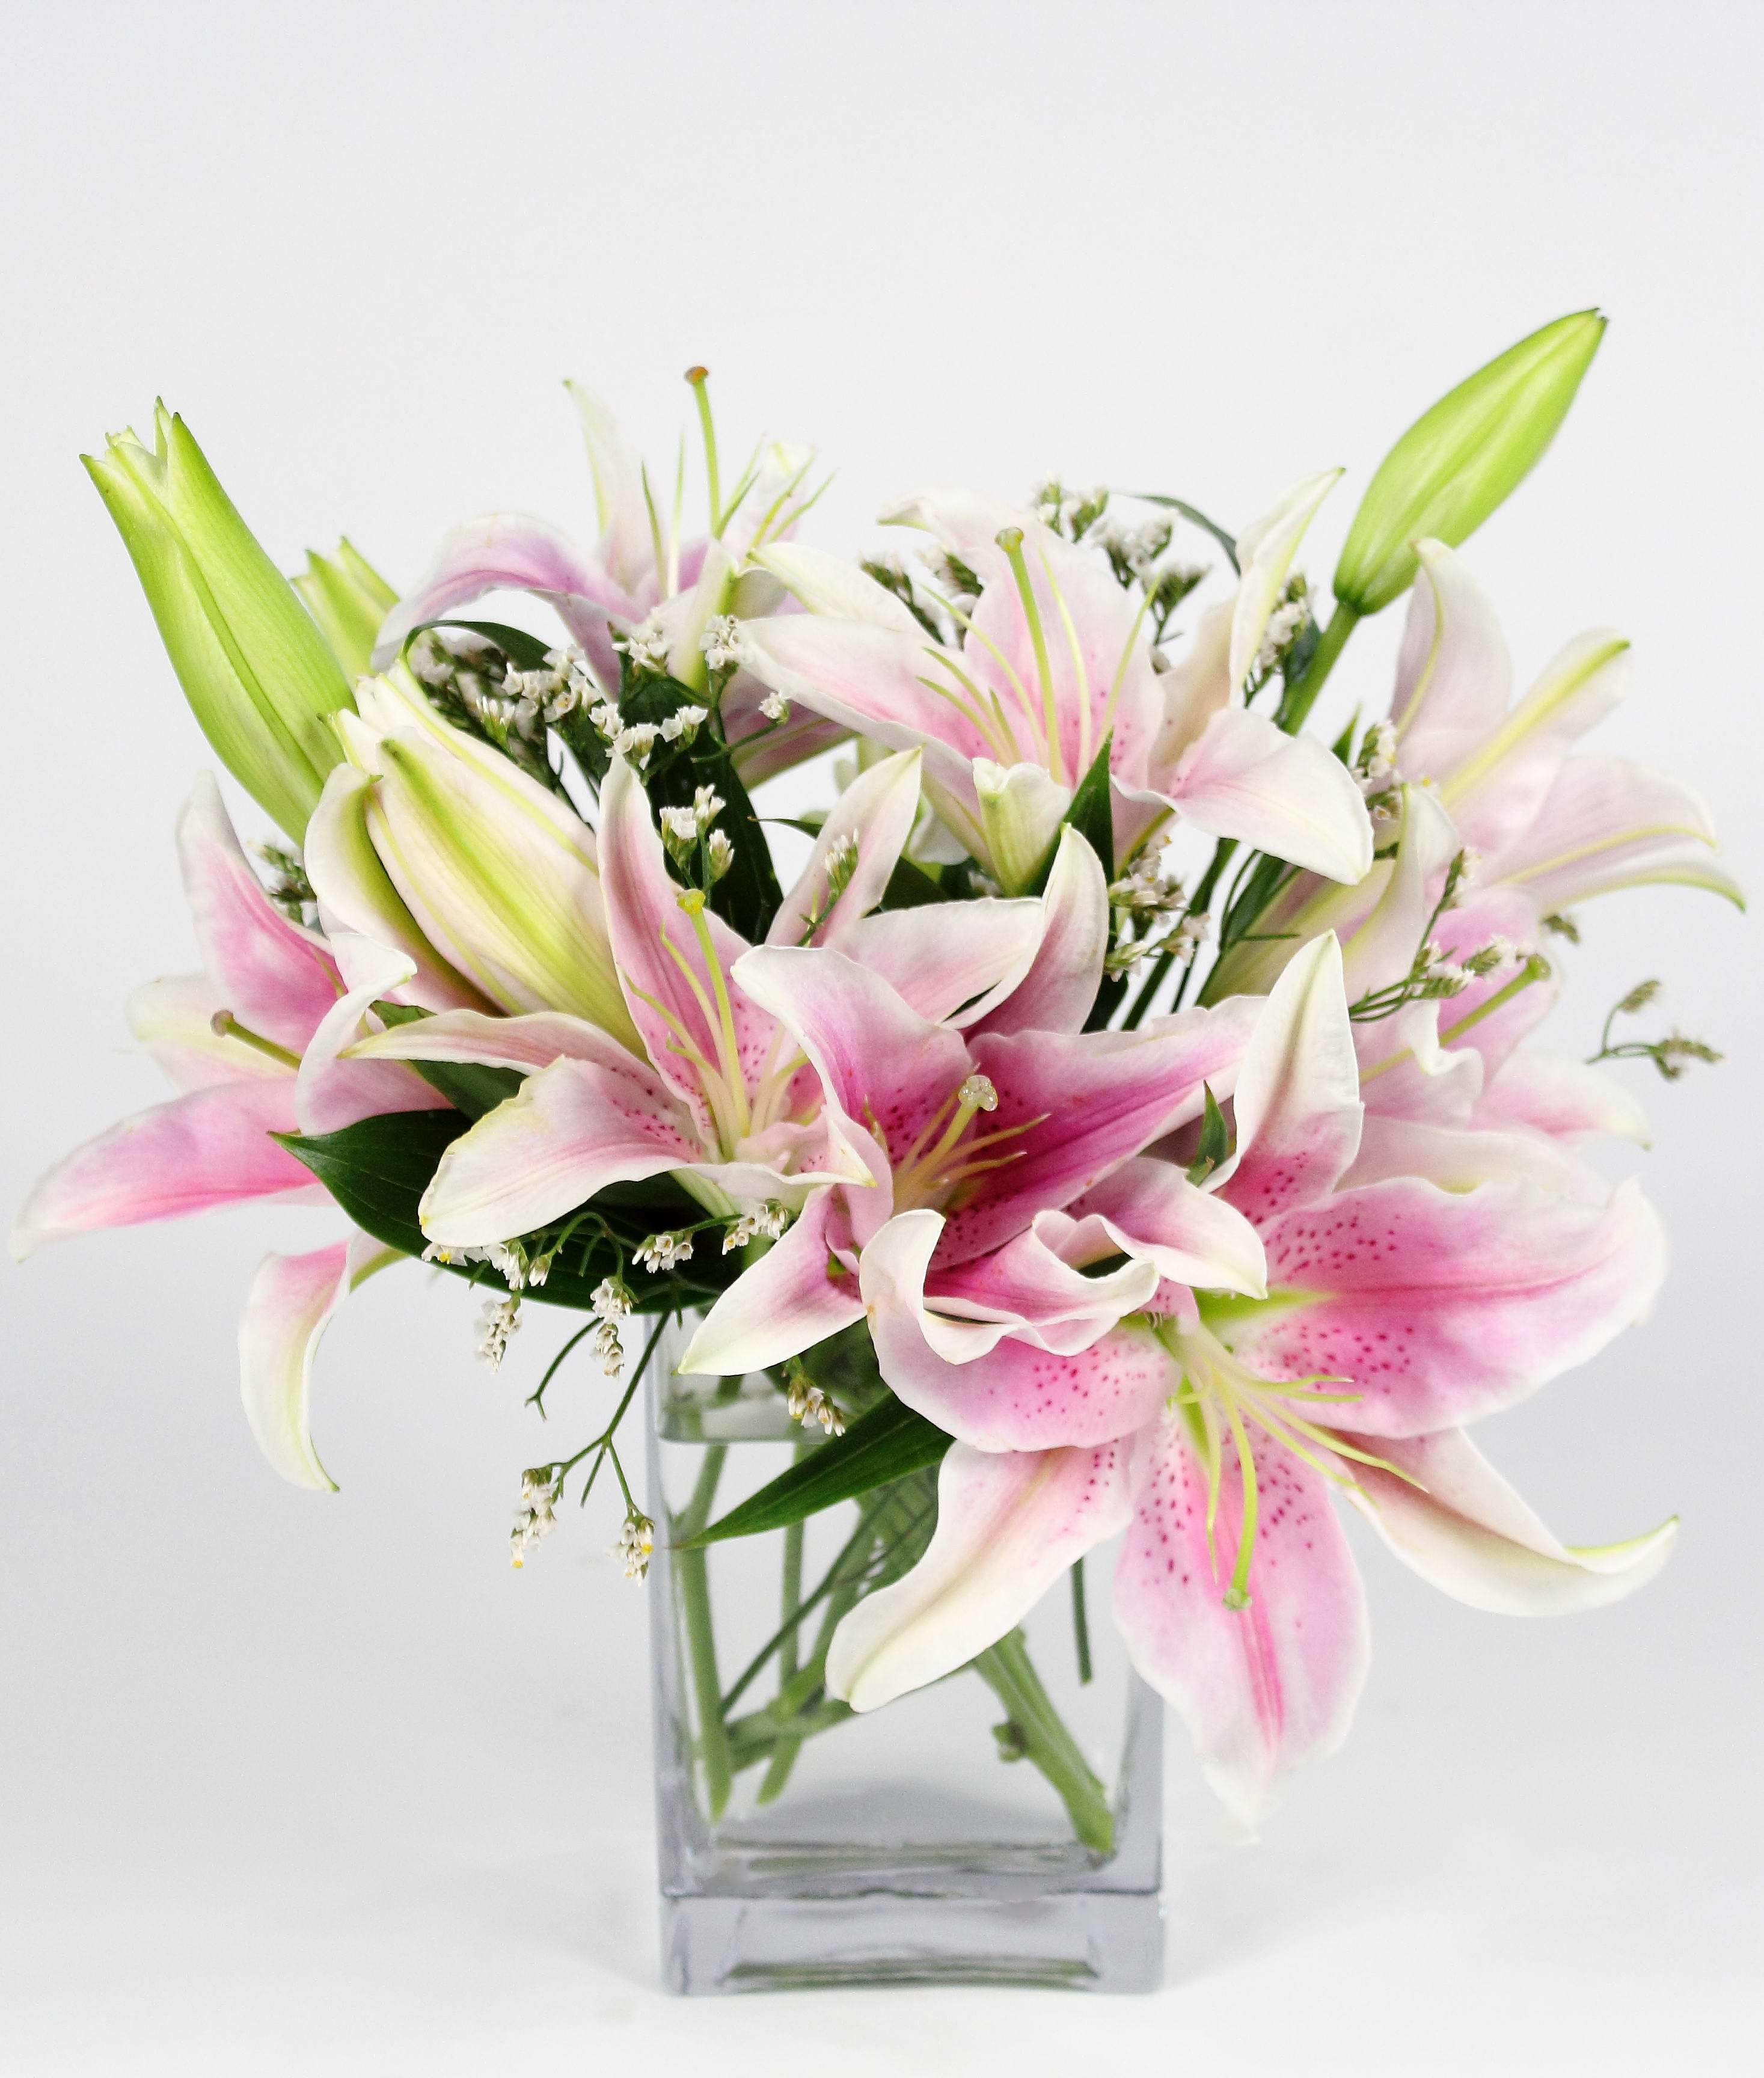 Perfect Pink Lily Posey by Iron Violets Design Studio